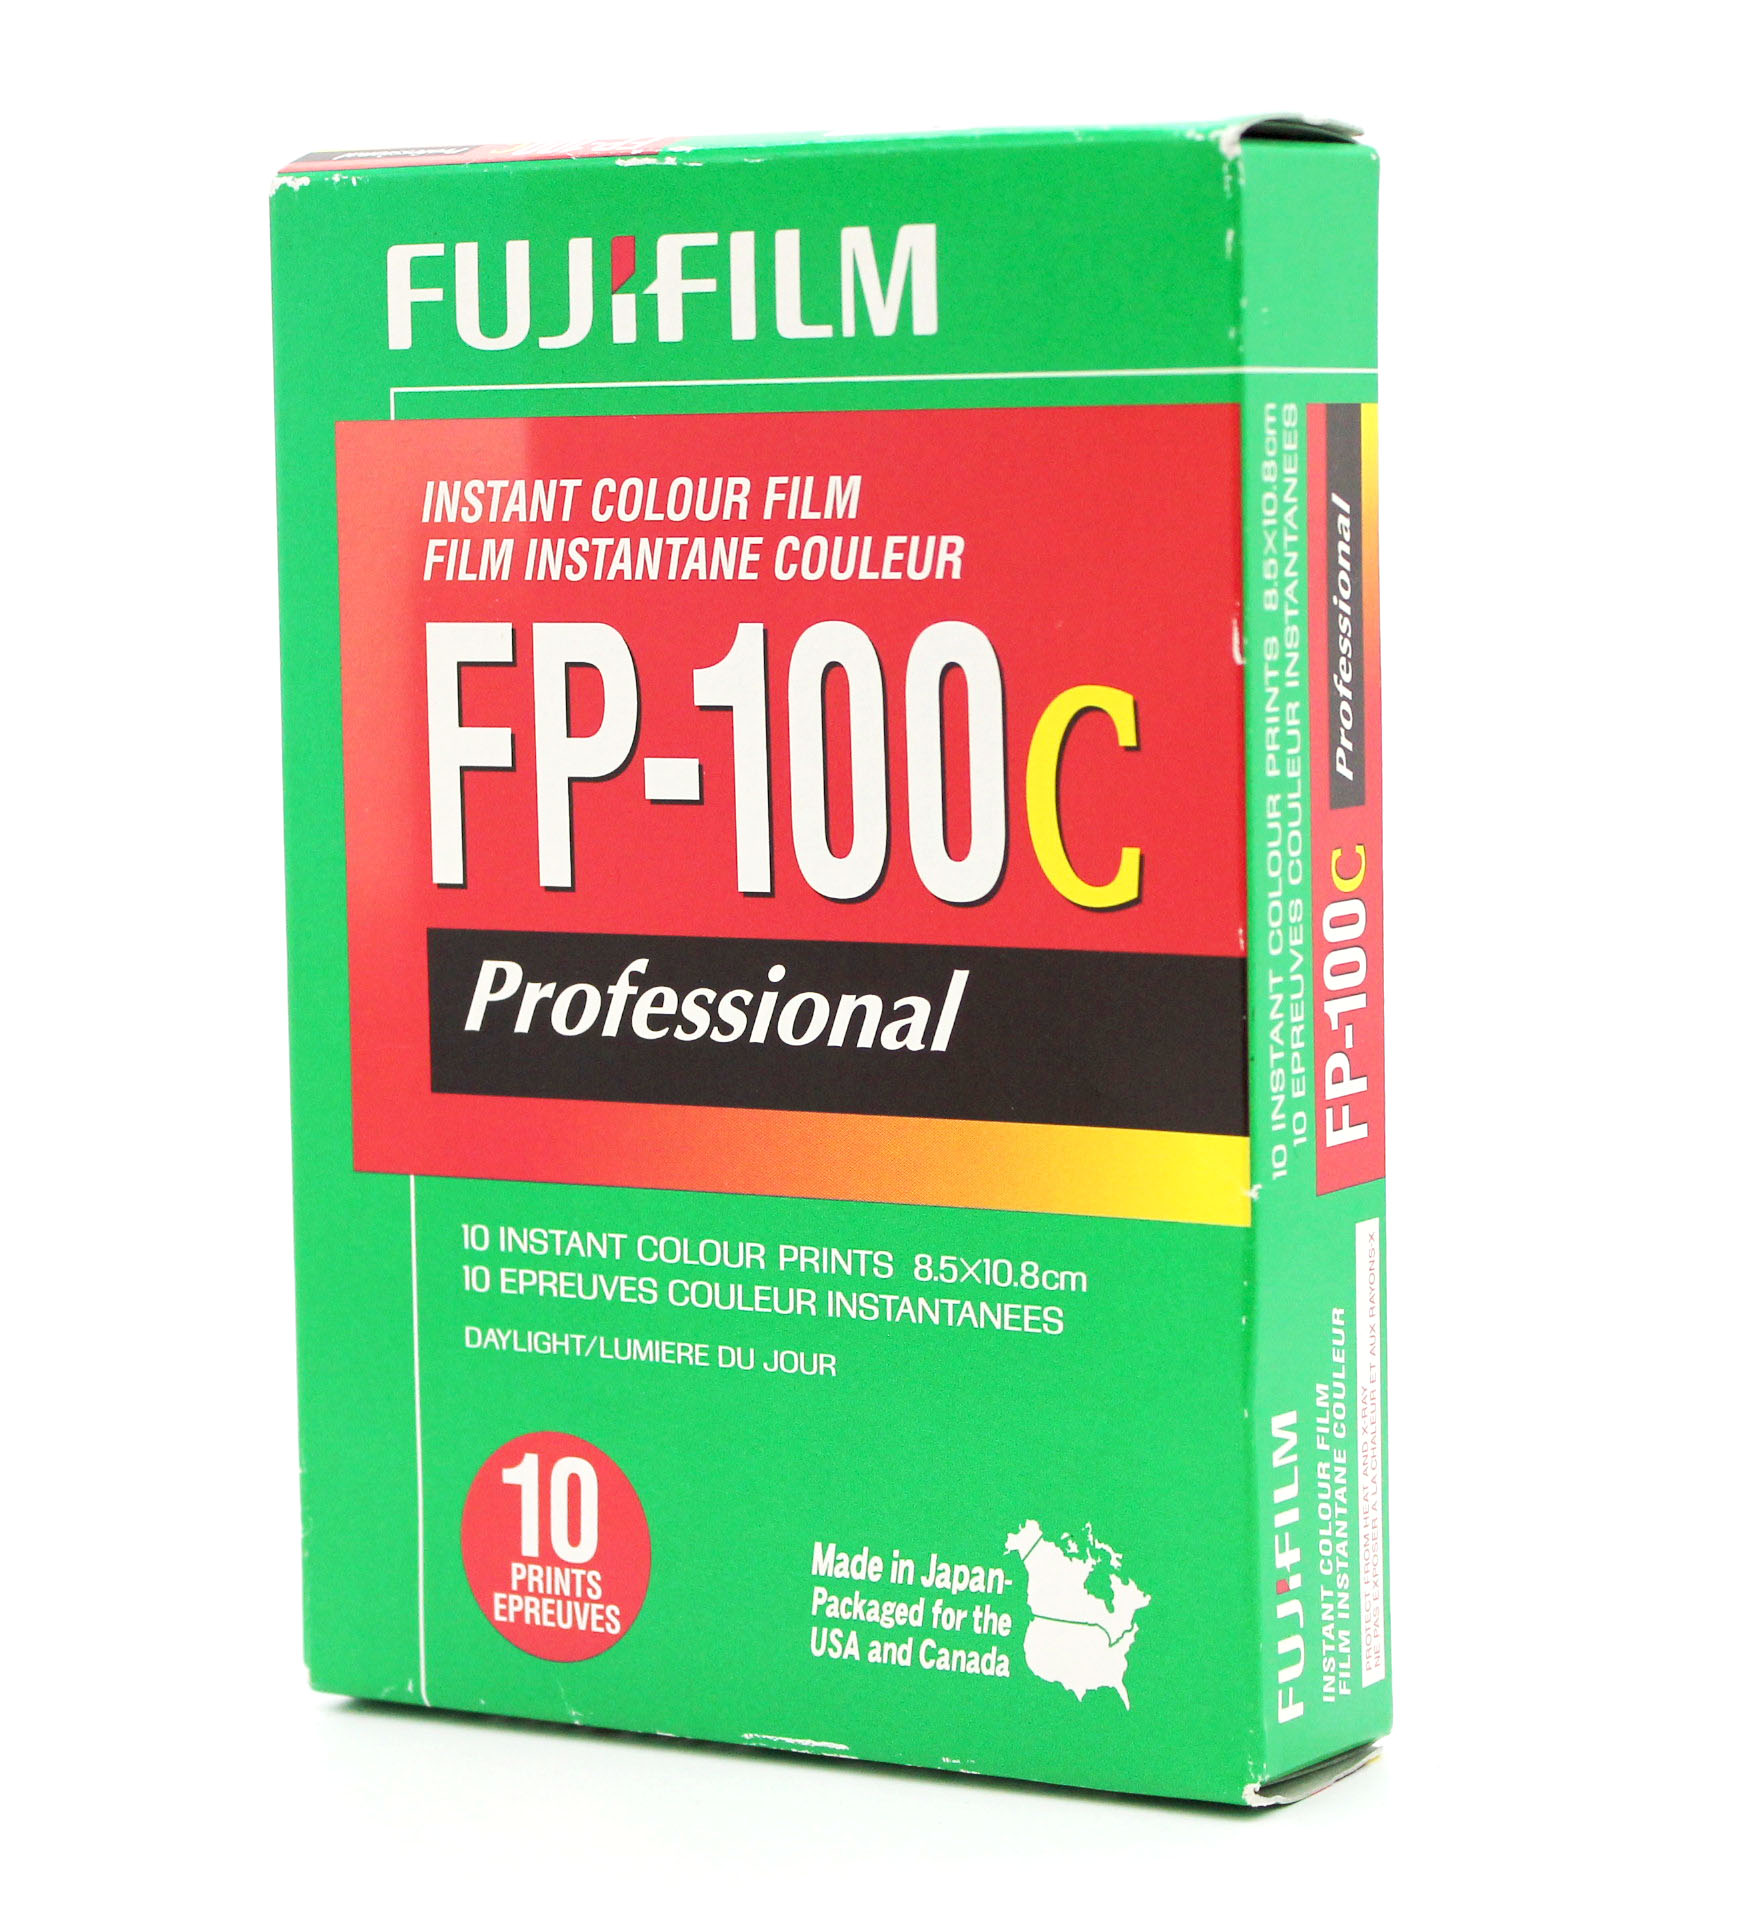 Japan Used Camera Shop | [New] Fujifilm FP-100C Professional Instant Color Film (Exp 2014) from Japan